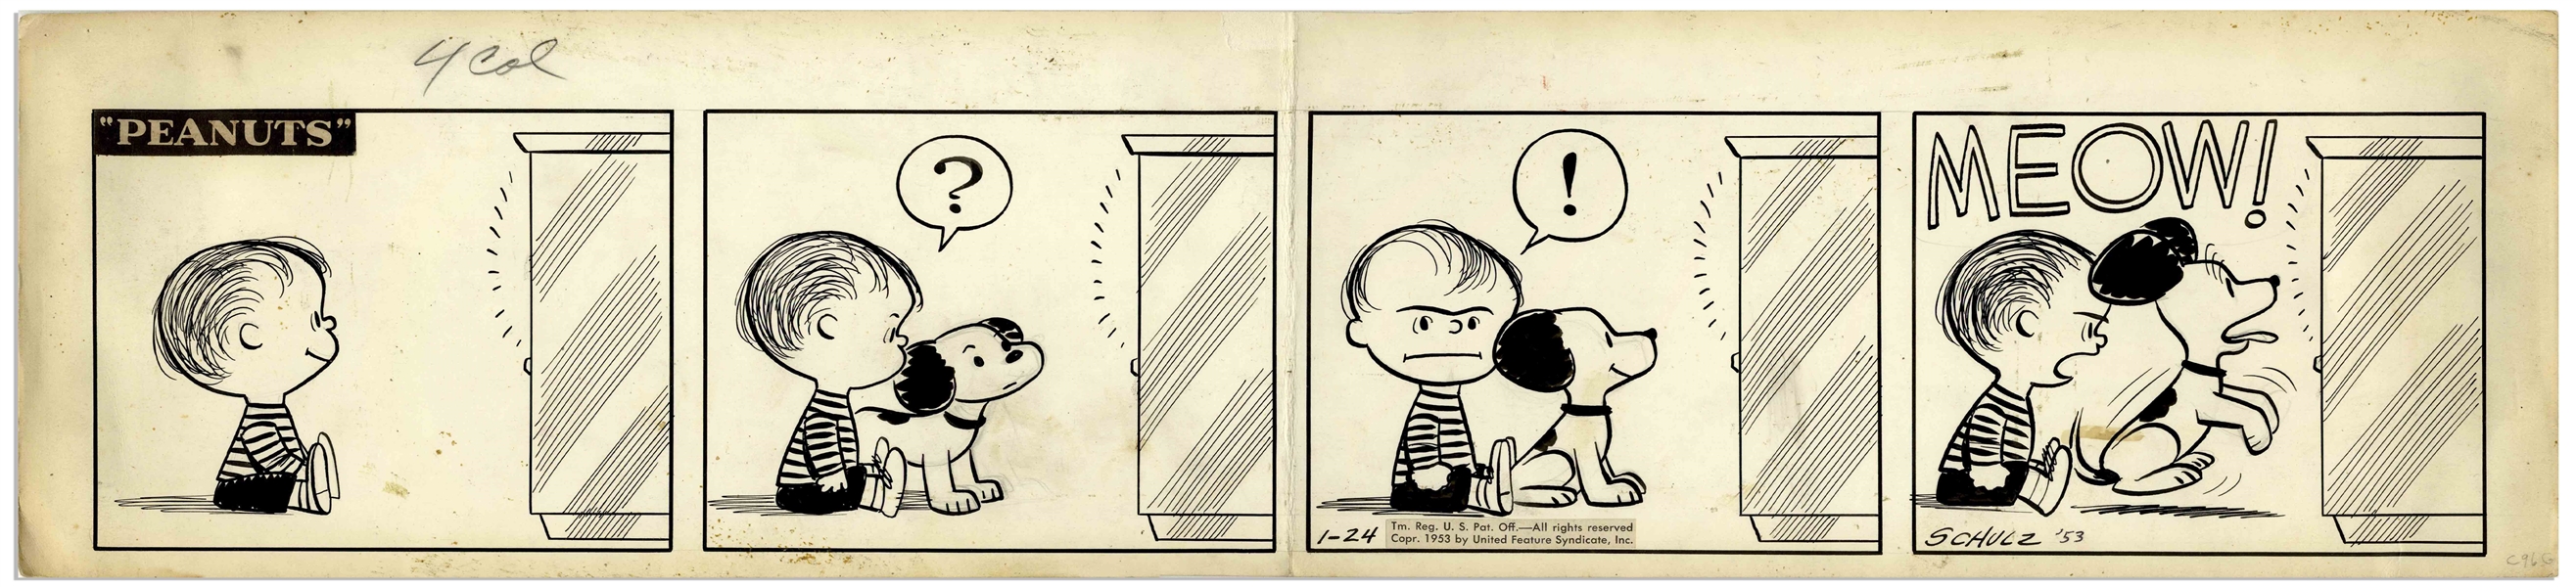 Charles Schulz Original Hand-Drawn ''Peanuts'' Comic Strip From January 1953 -- In this Early Strip, Linus & Snoopy Battle Over the TV & Linus Is Shown Without His Blanket